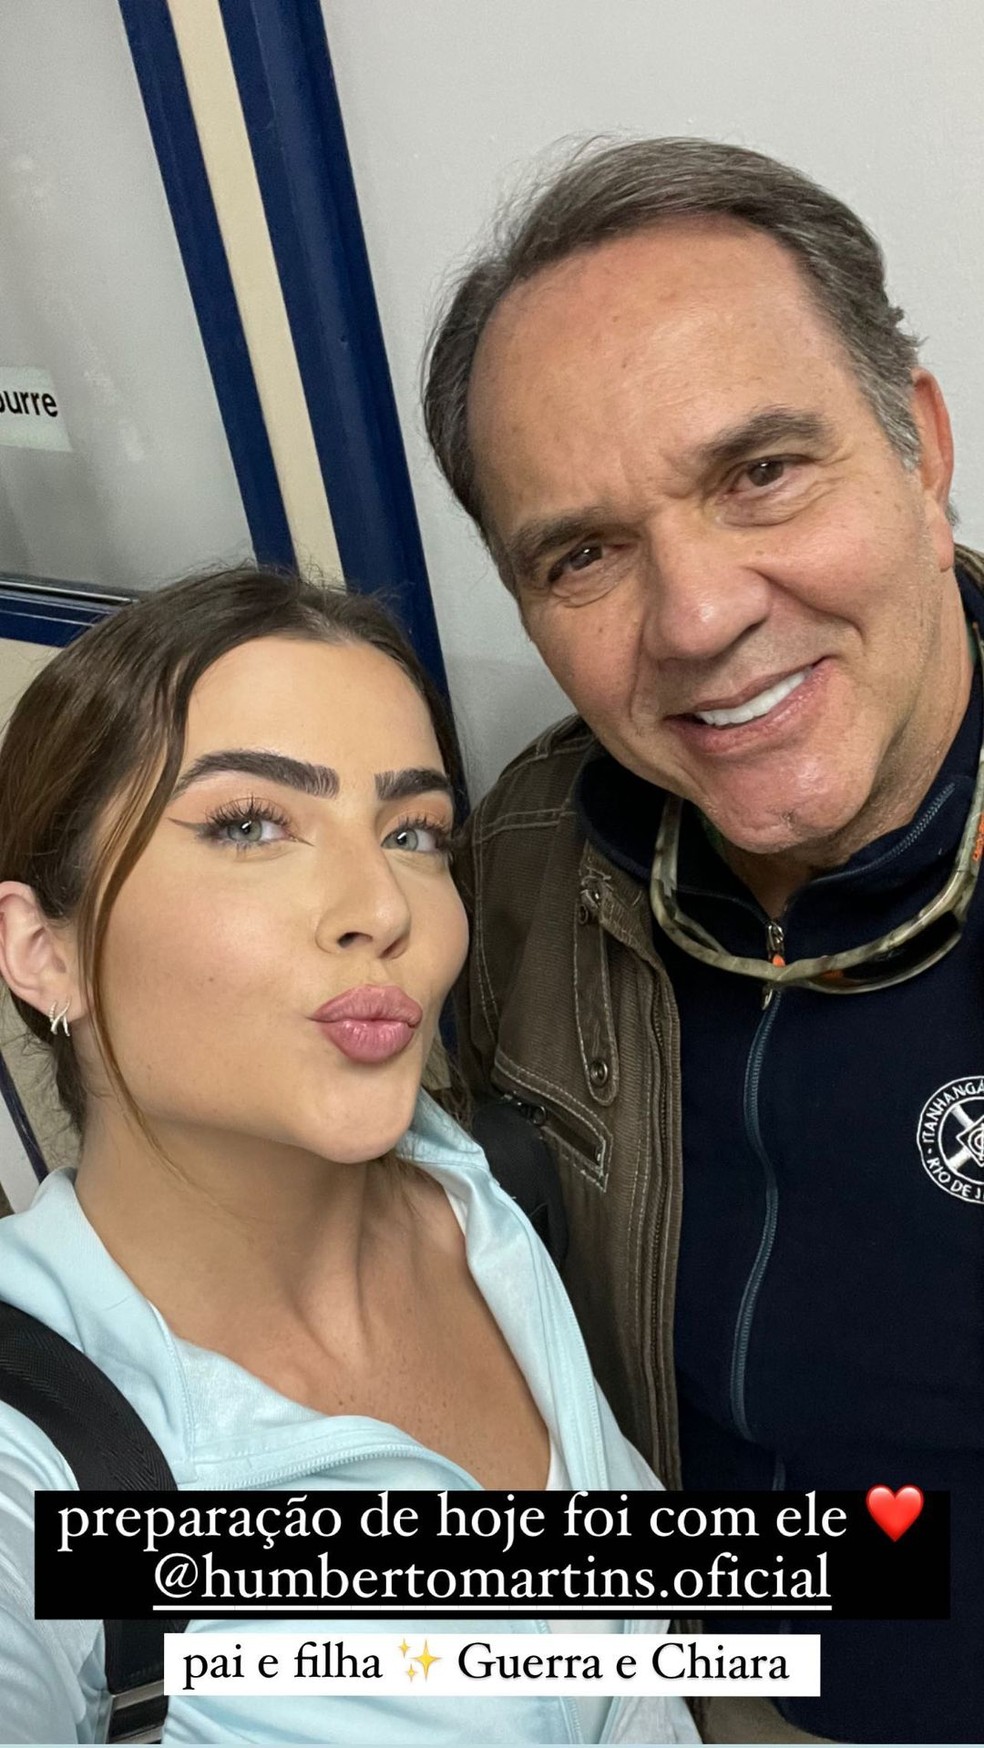 Jade Picon posts a photo with Humberto Martins behind the scenes of 'Travessia' — Photo: Instagram